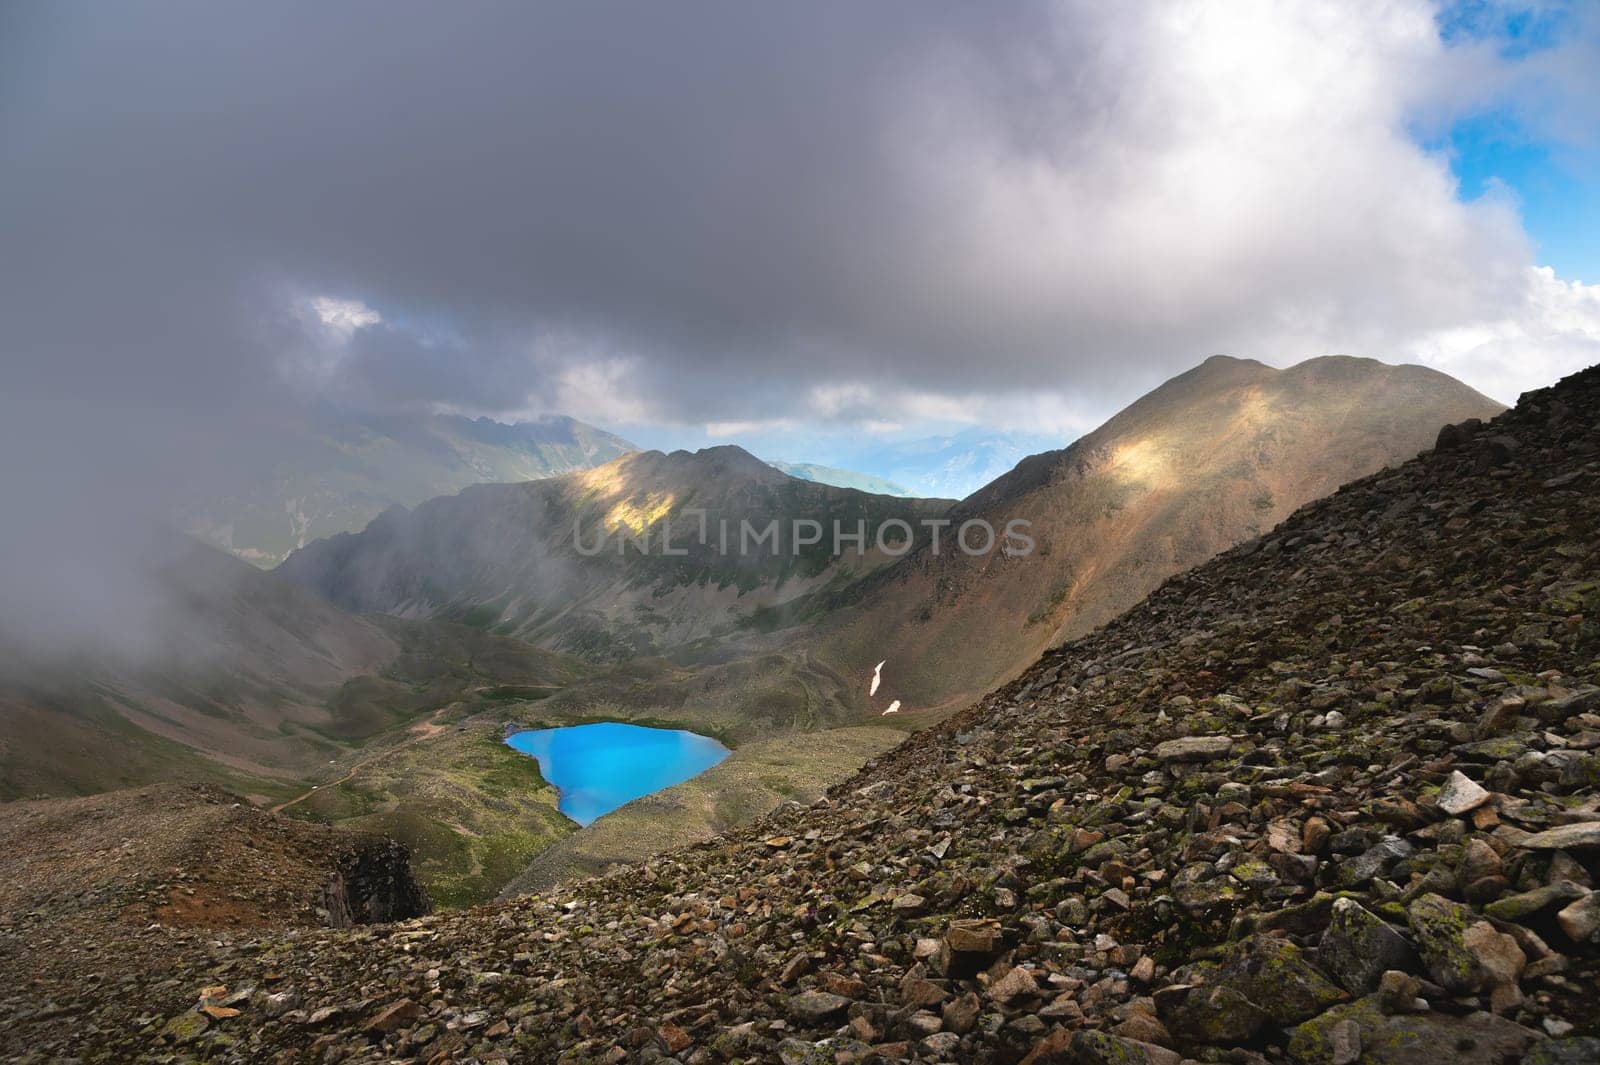 View of a turquoise colored lake between high and rocky mountains. Beautiful alpine landscape by yanik88